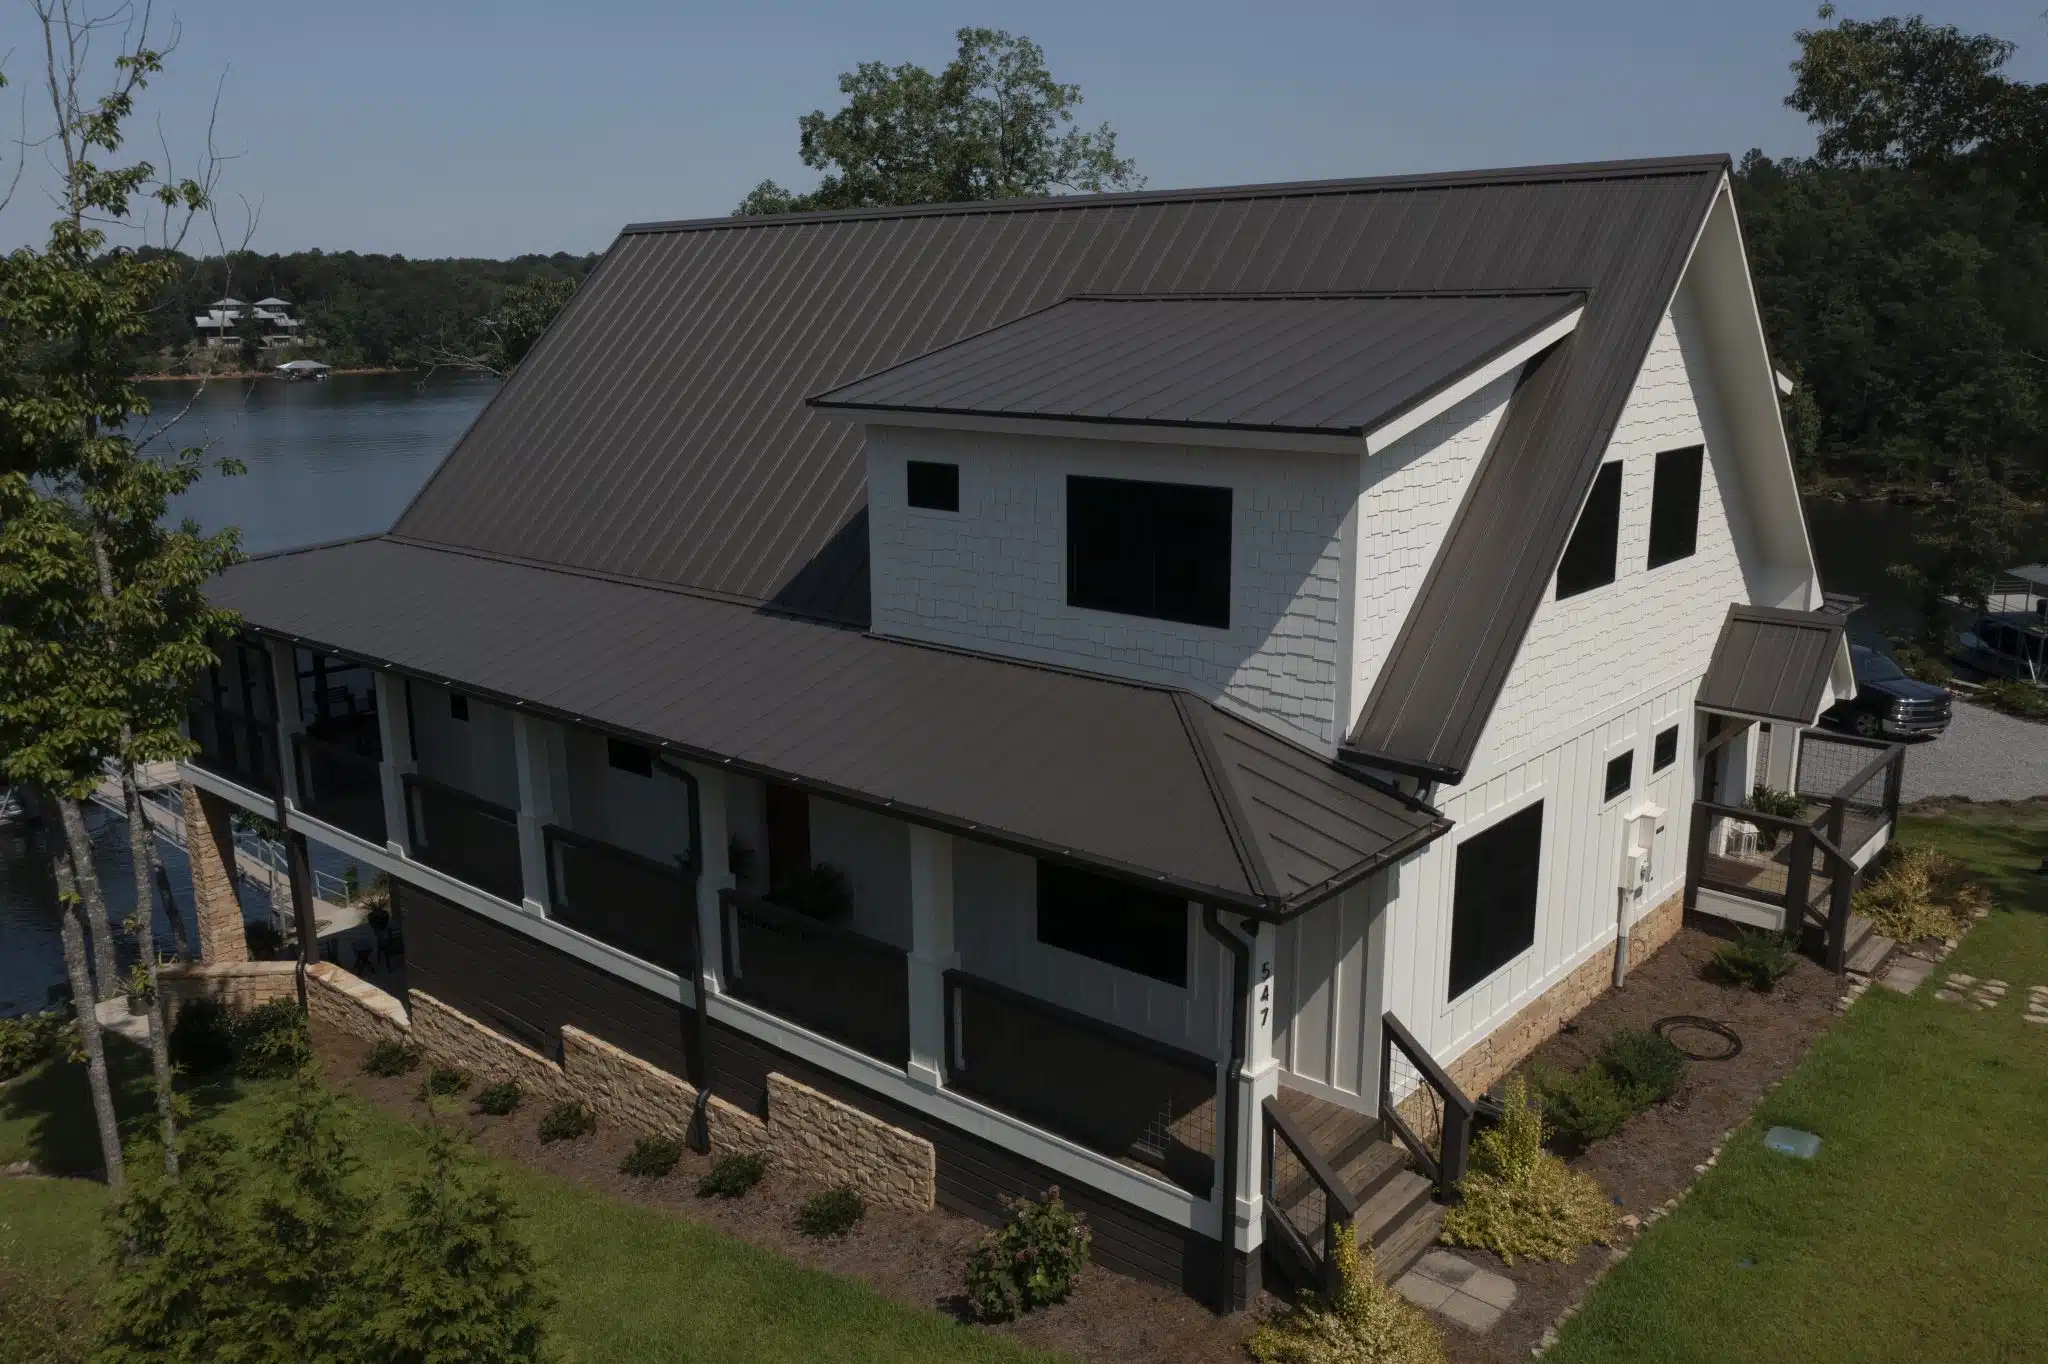 Board and Batten white siding and burnished slate horizon-loc roofing